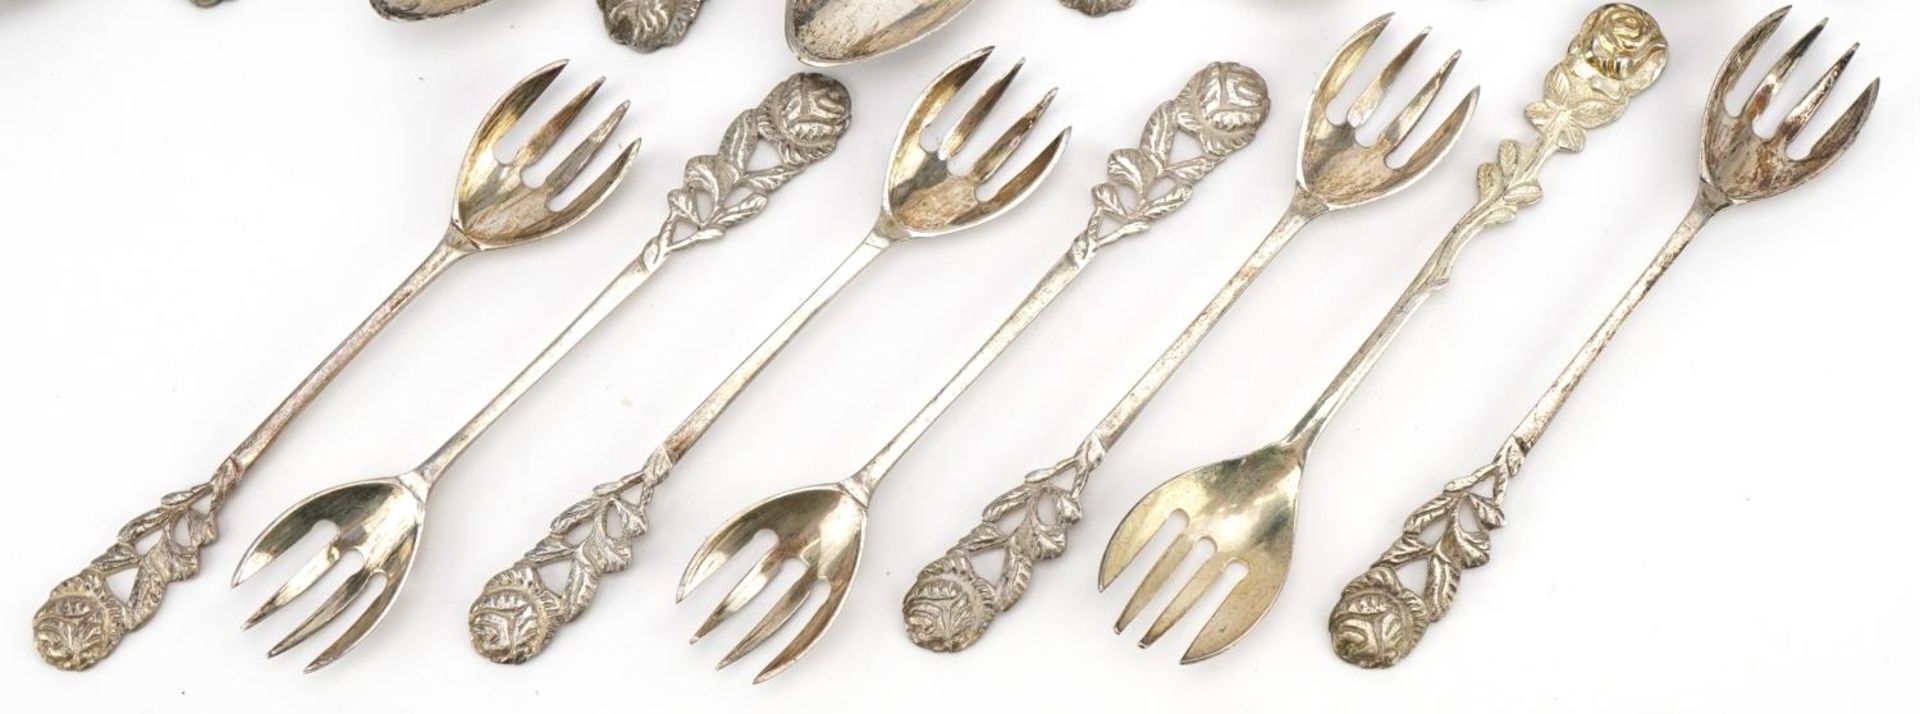 Eighteen 800 grade silver forks and spoons with naturalistic terminals, 12.5cm in length, 290.0g : - Image 3 of 4